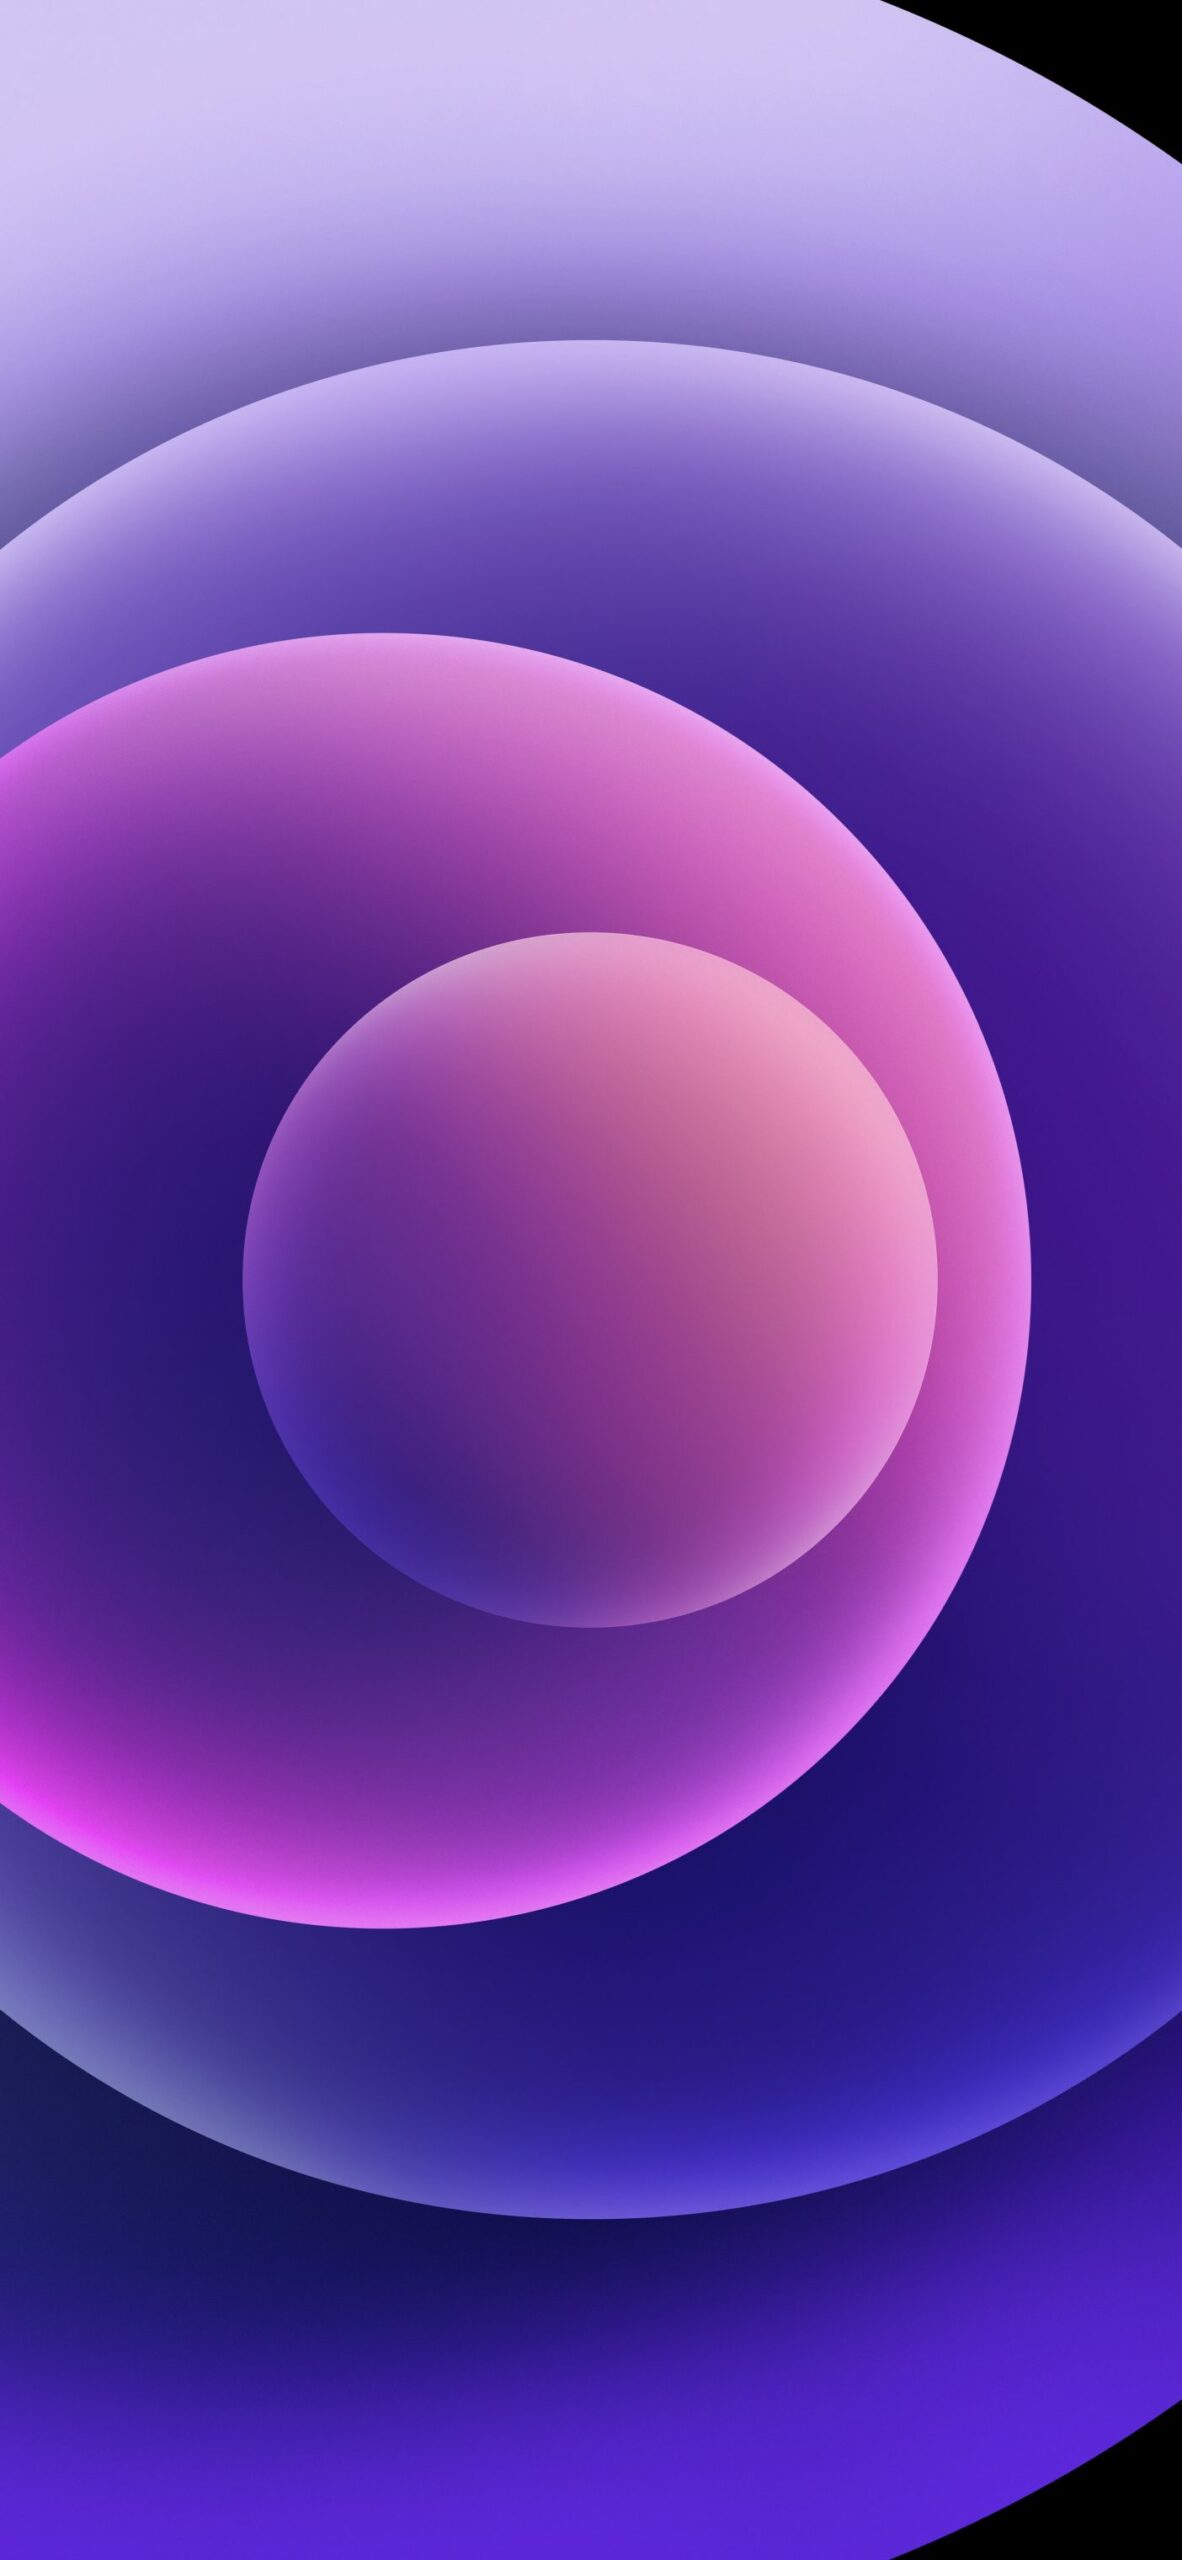 Apple iOS 14.5 RC adds a new purple live wallpaper ...